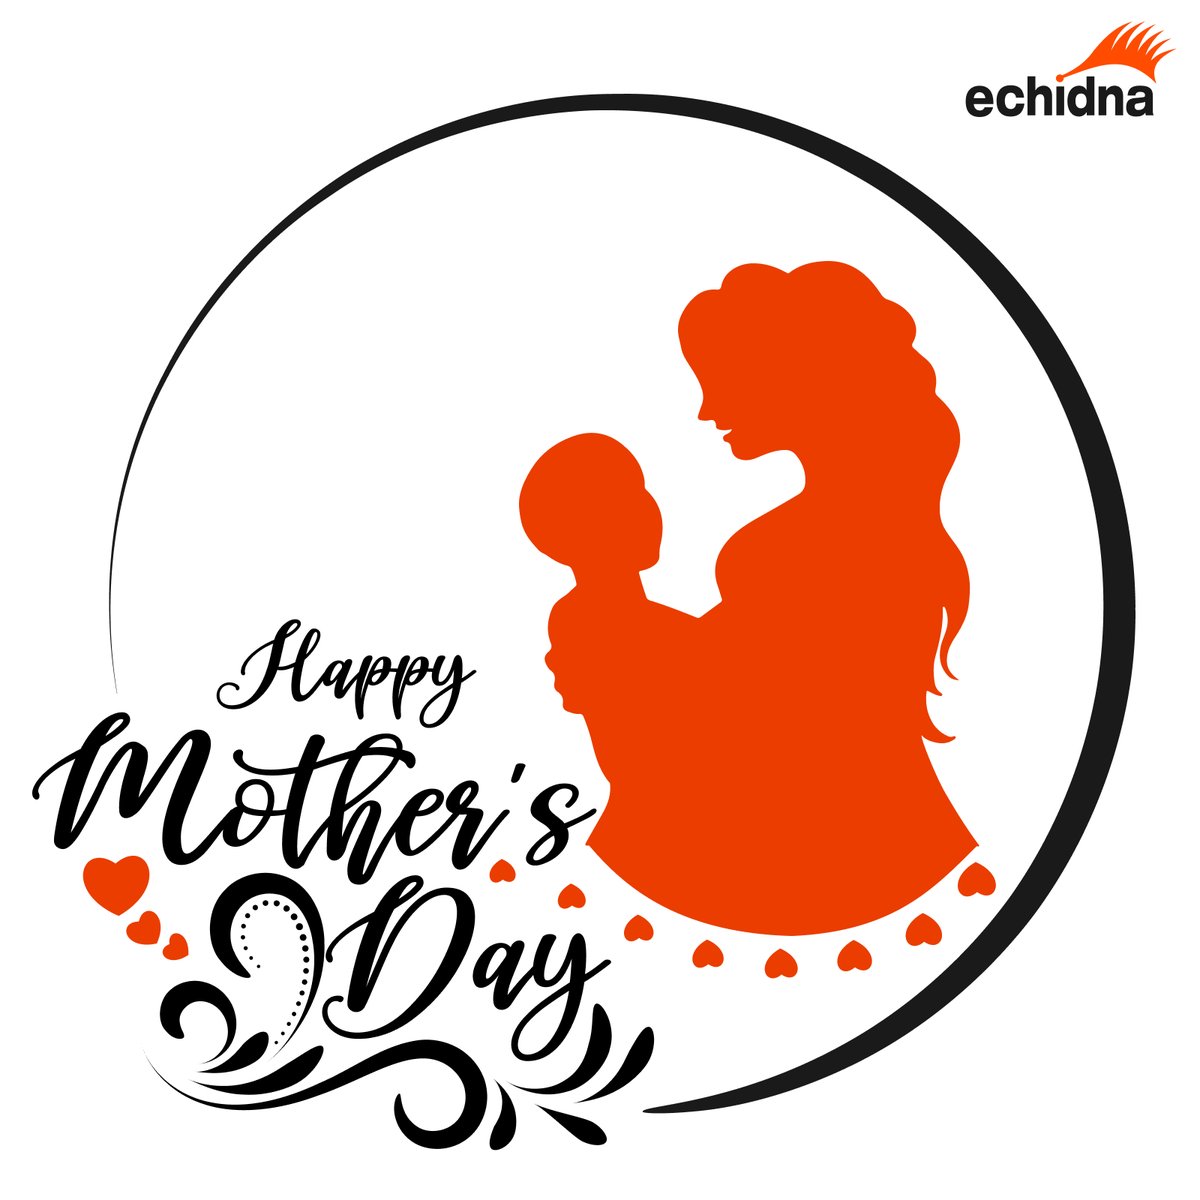 This Mother's Day weekend Echidna is celebrating the exceptional women—mothers, mentors, and role models—who enrich our lives. Your wisdom, strength, and compassion create spaces where creativity soars and possibilities know no bounds.
#MothersDay #WomenInLeadership #Inspiration